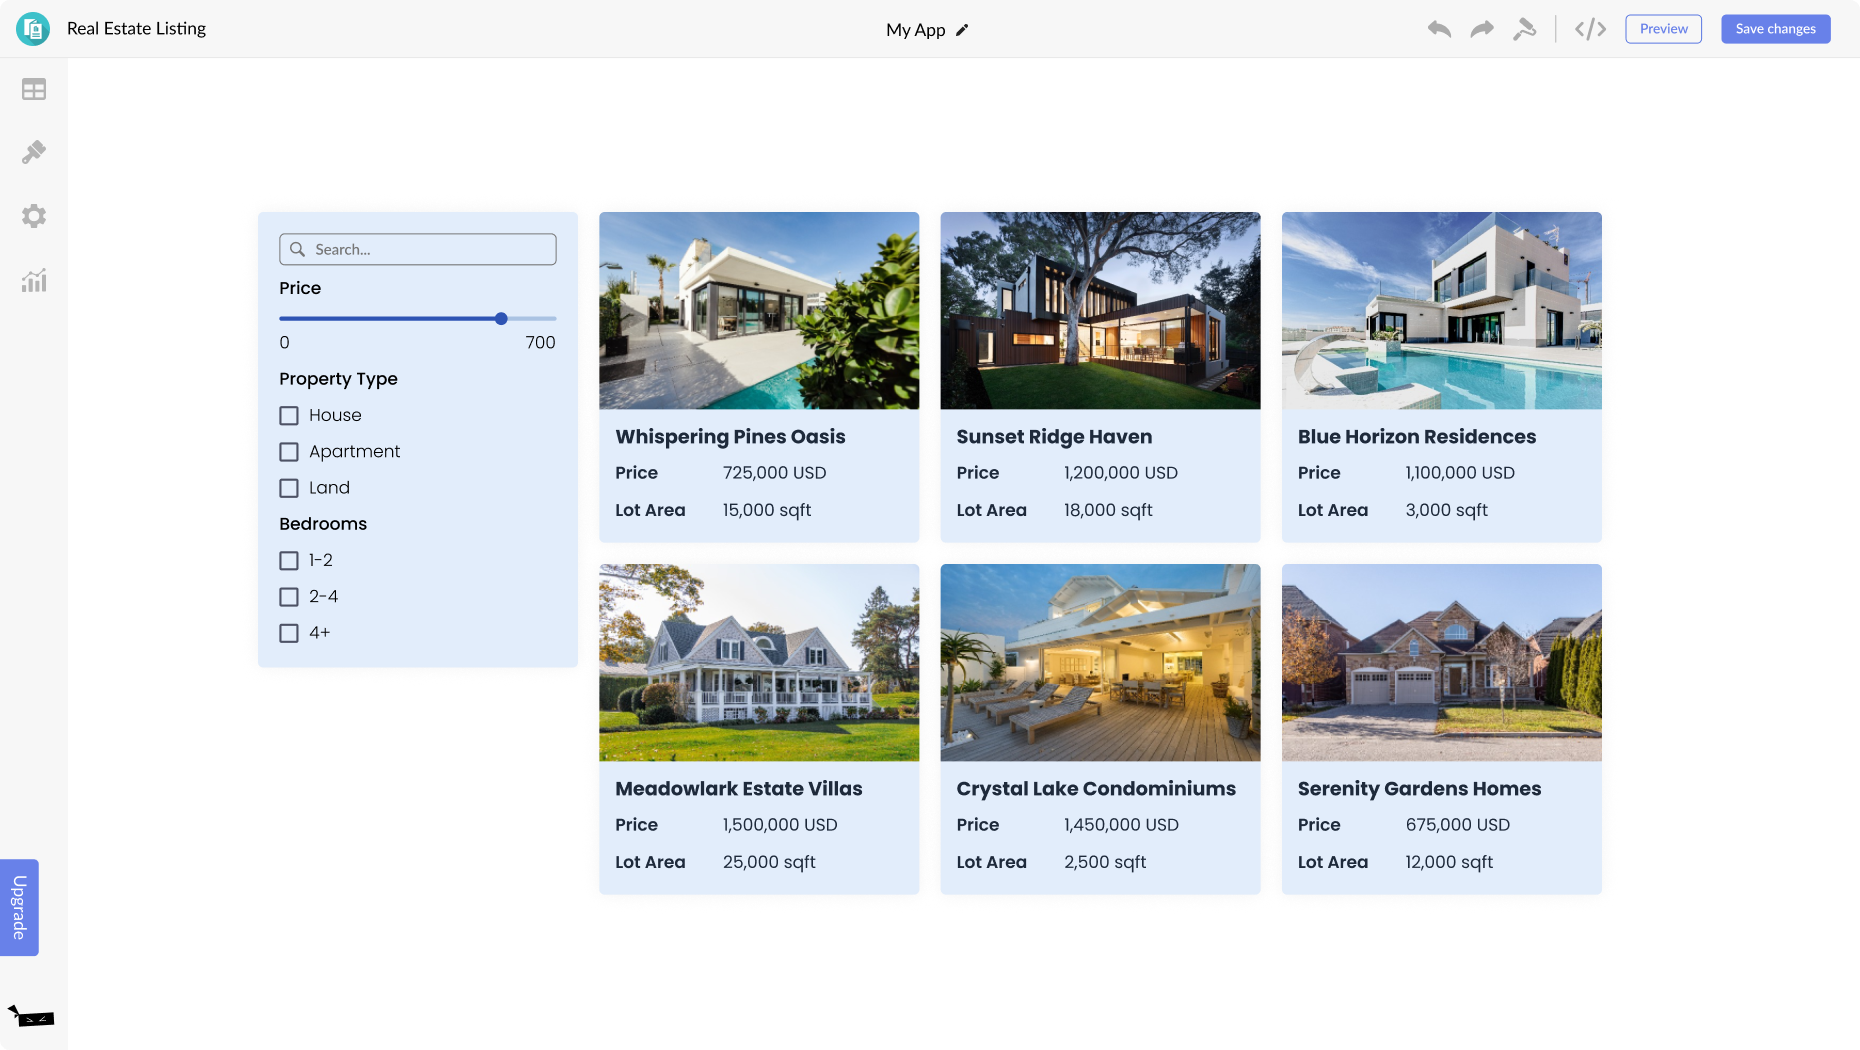 Real Estate Listings for Wix